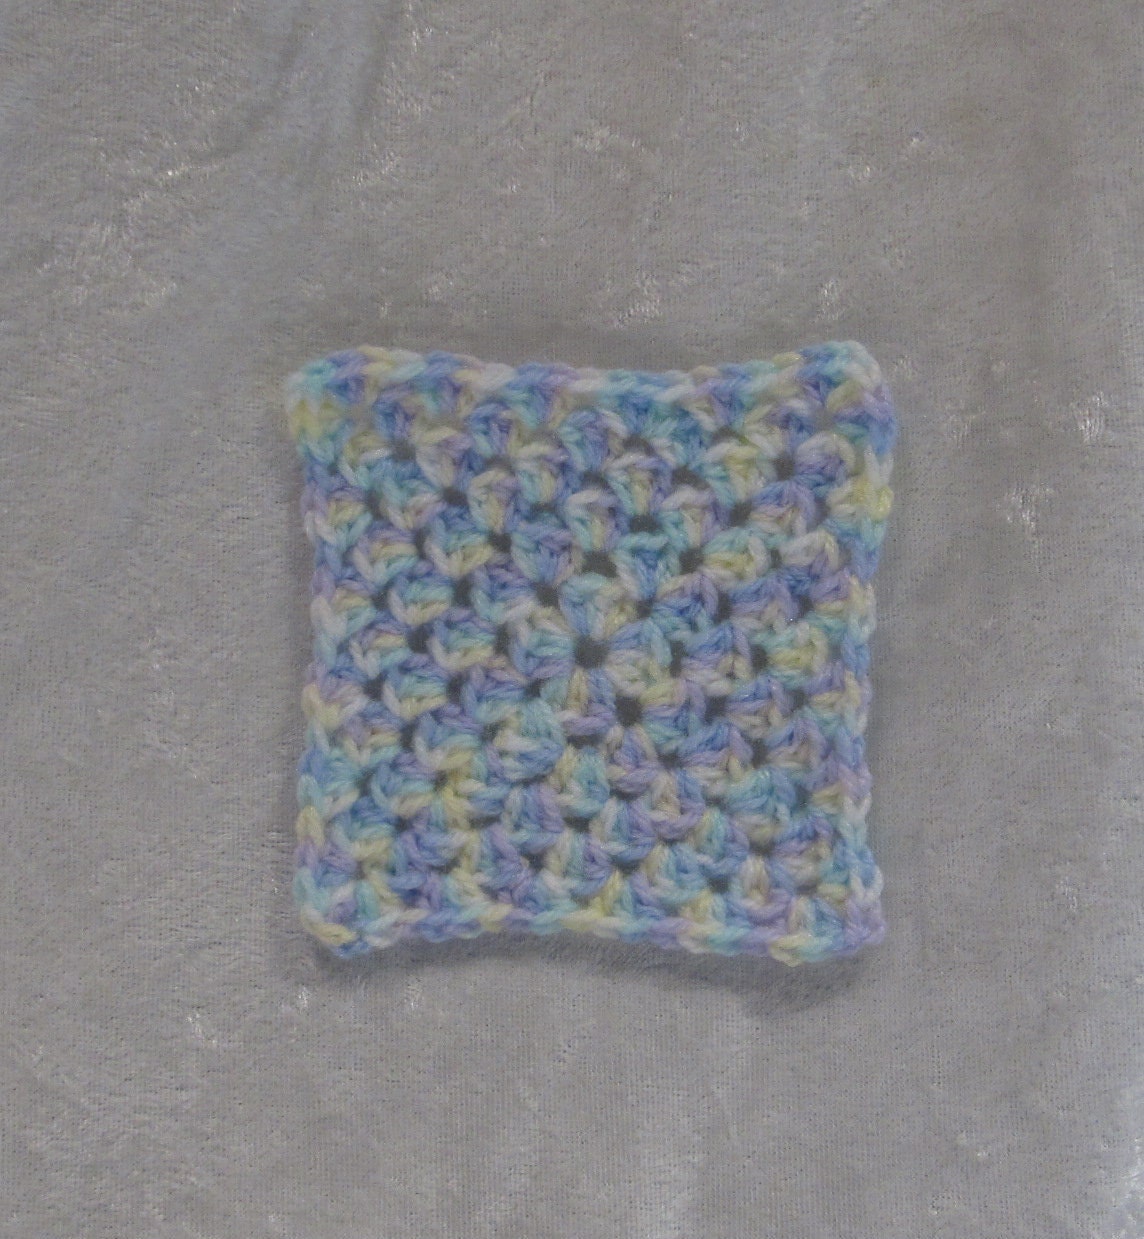 CROCHET DOLLHOUSE DOLL BABY BLANKET 6 Inches Square SALE!! 